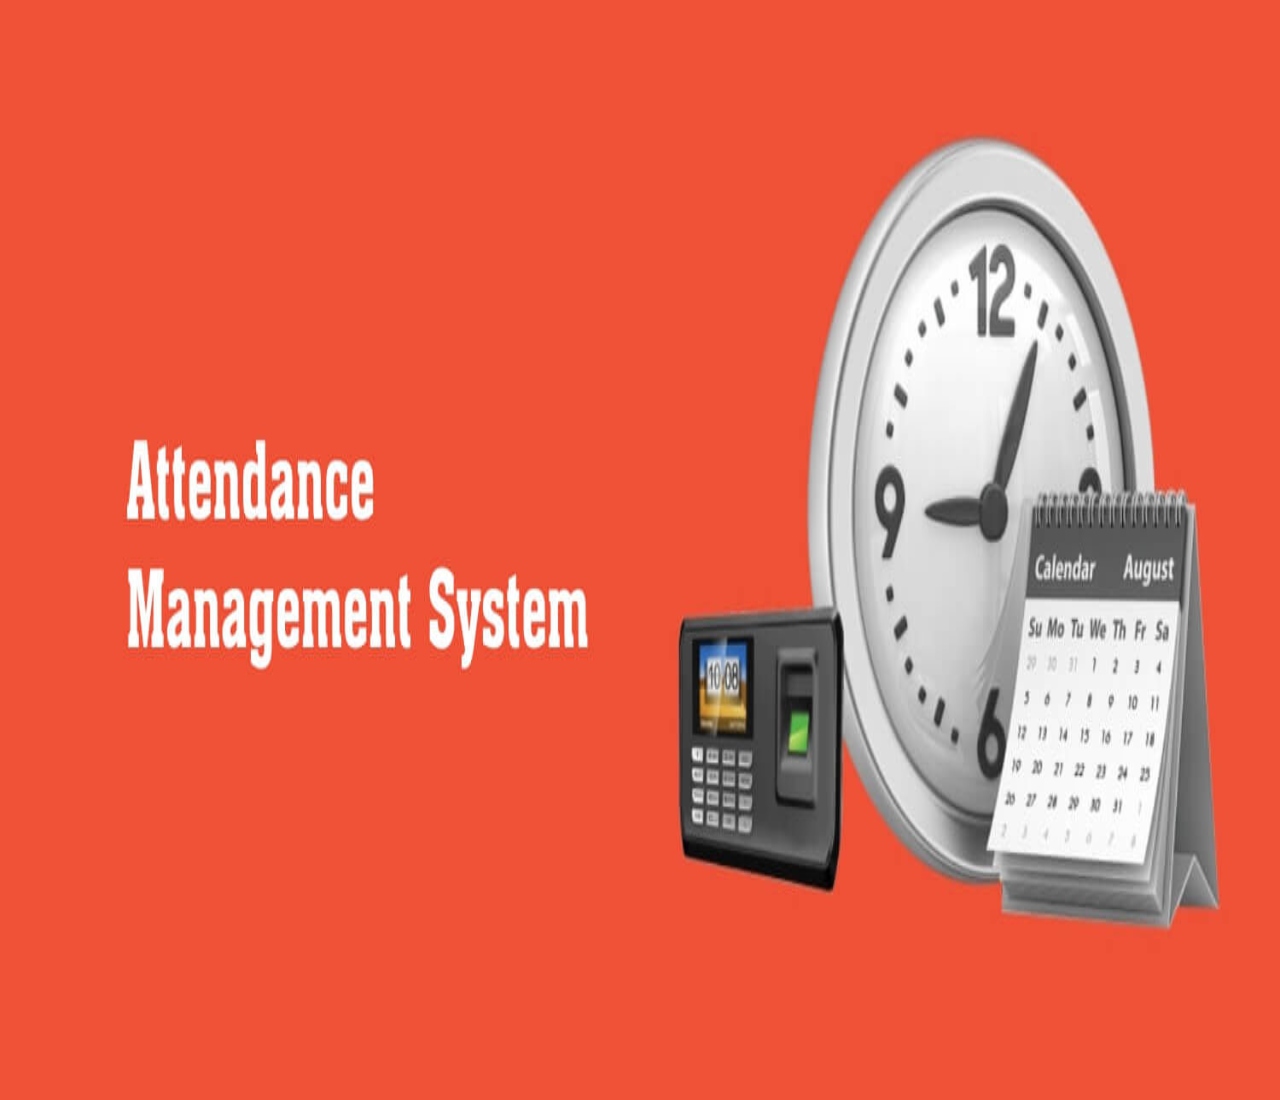 What to look for in an Employee Payroll and Attendance Management System?